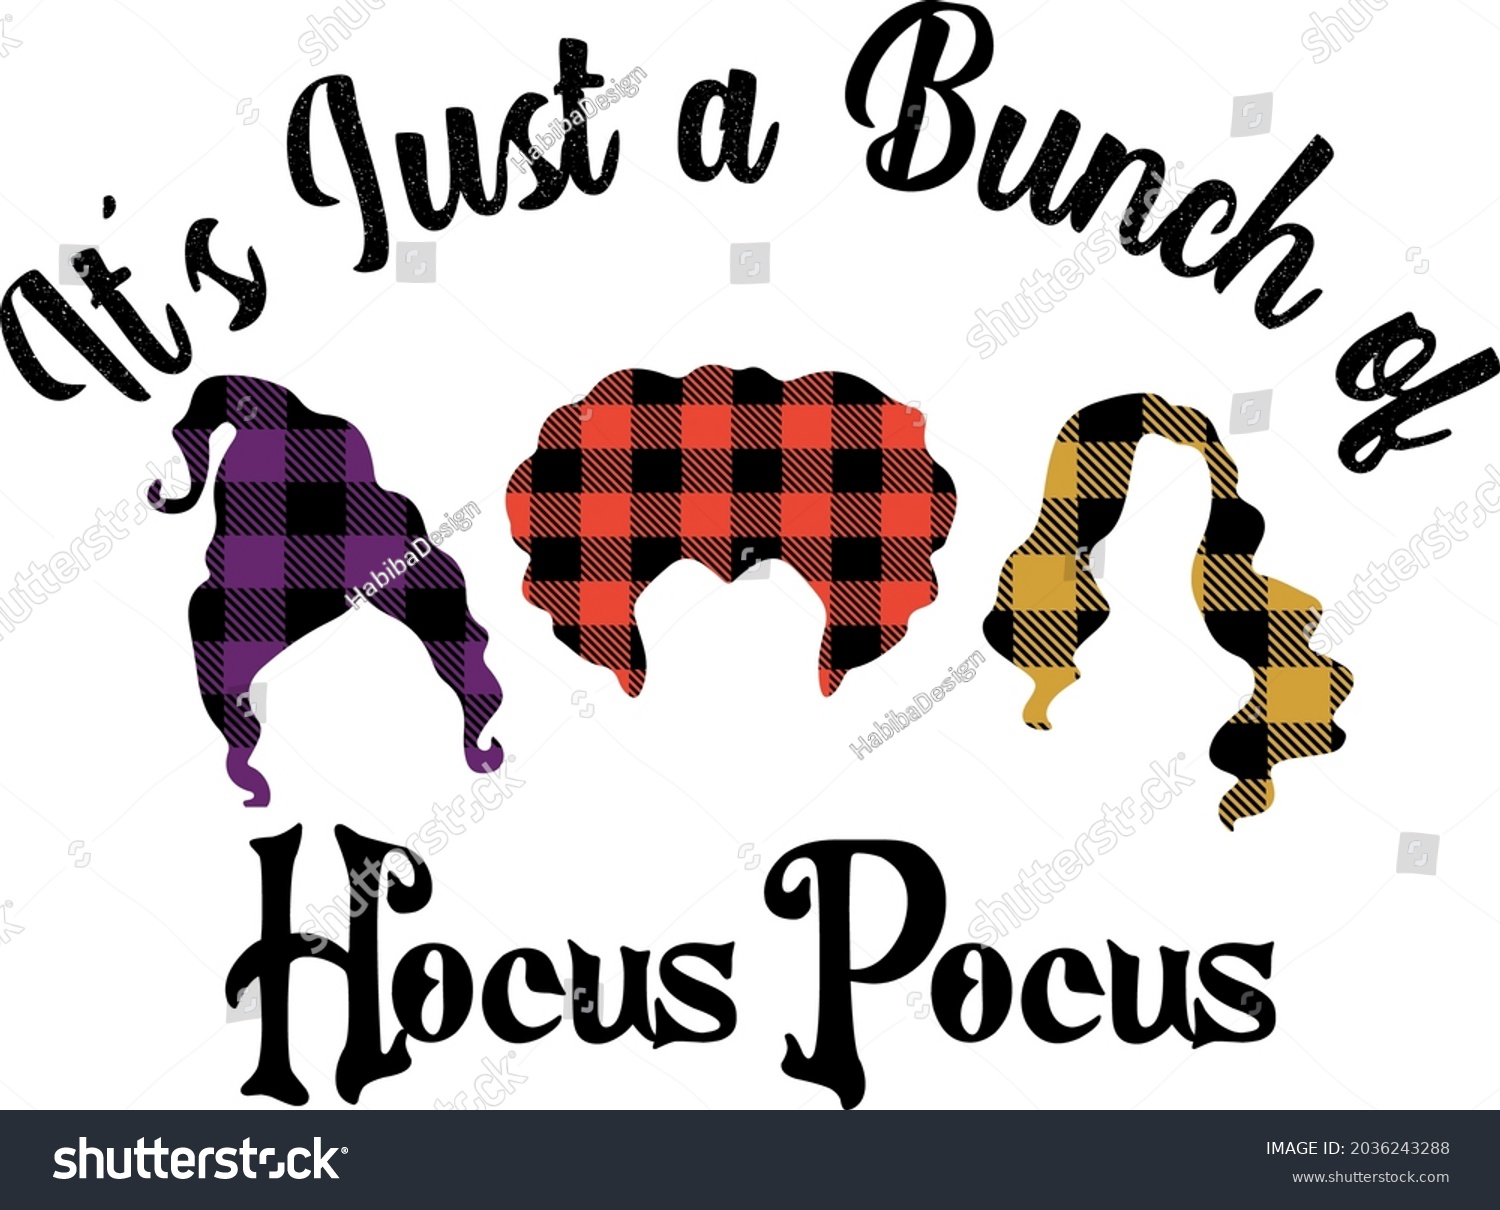 SVG of It's Just a Bunch of Hocus Pocus - Sanderson Sisters SVG Halloween Vector and Clip Art svg